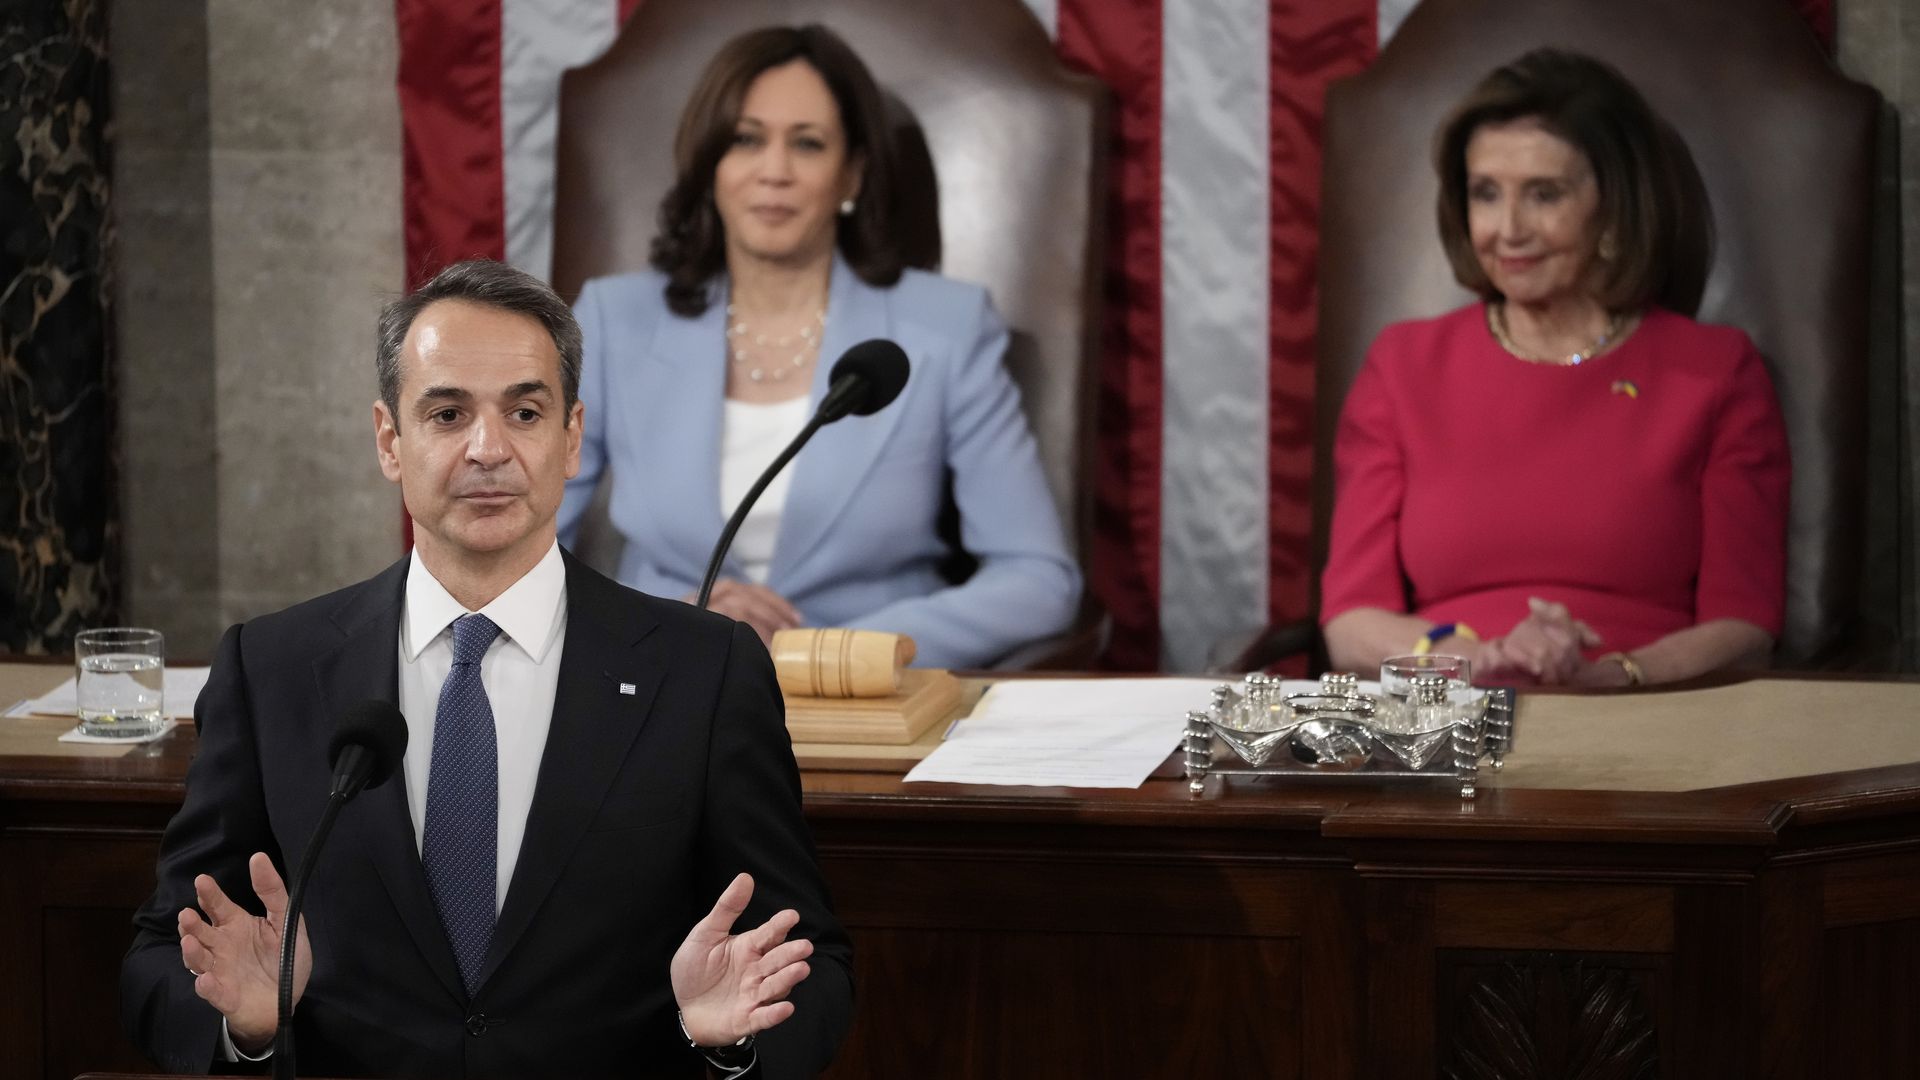 Vice President Kamala Harris and House Speaker Nancy Pelosi are seen listening to Greece's prime minister as he addresses Congress.